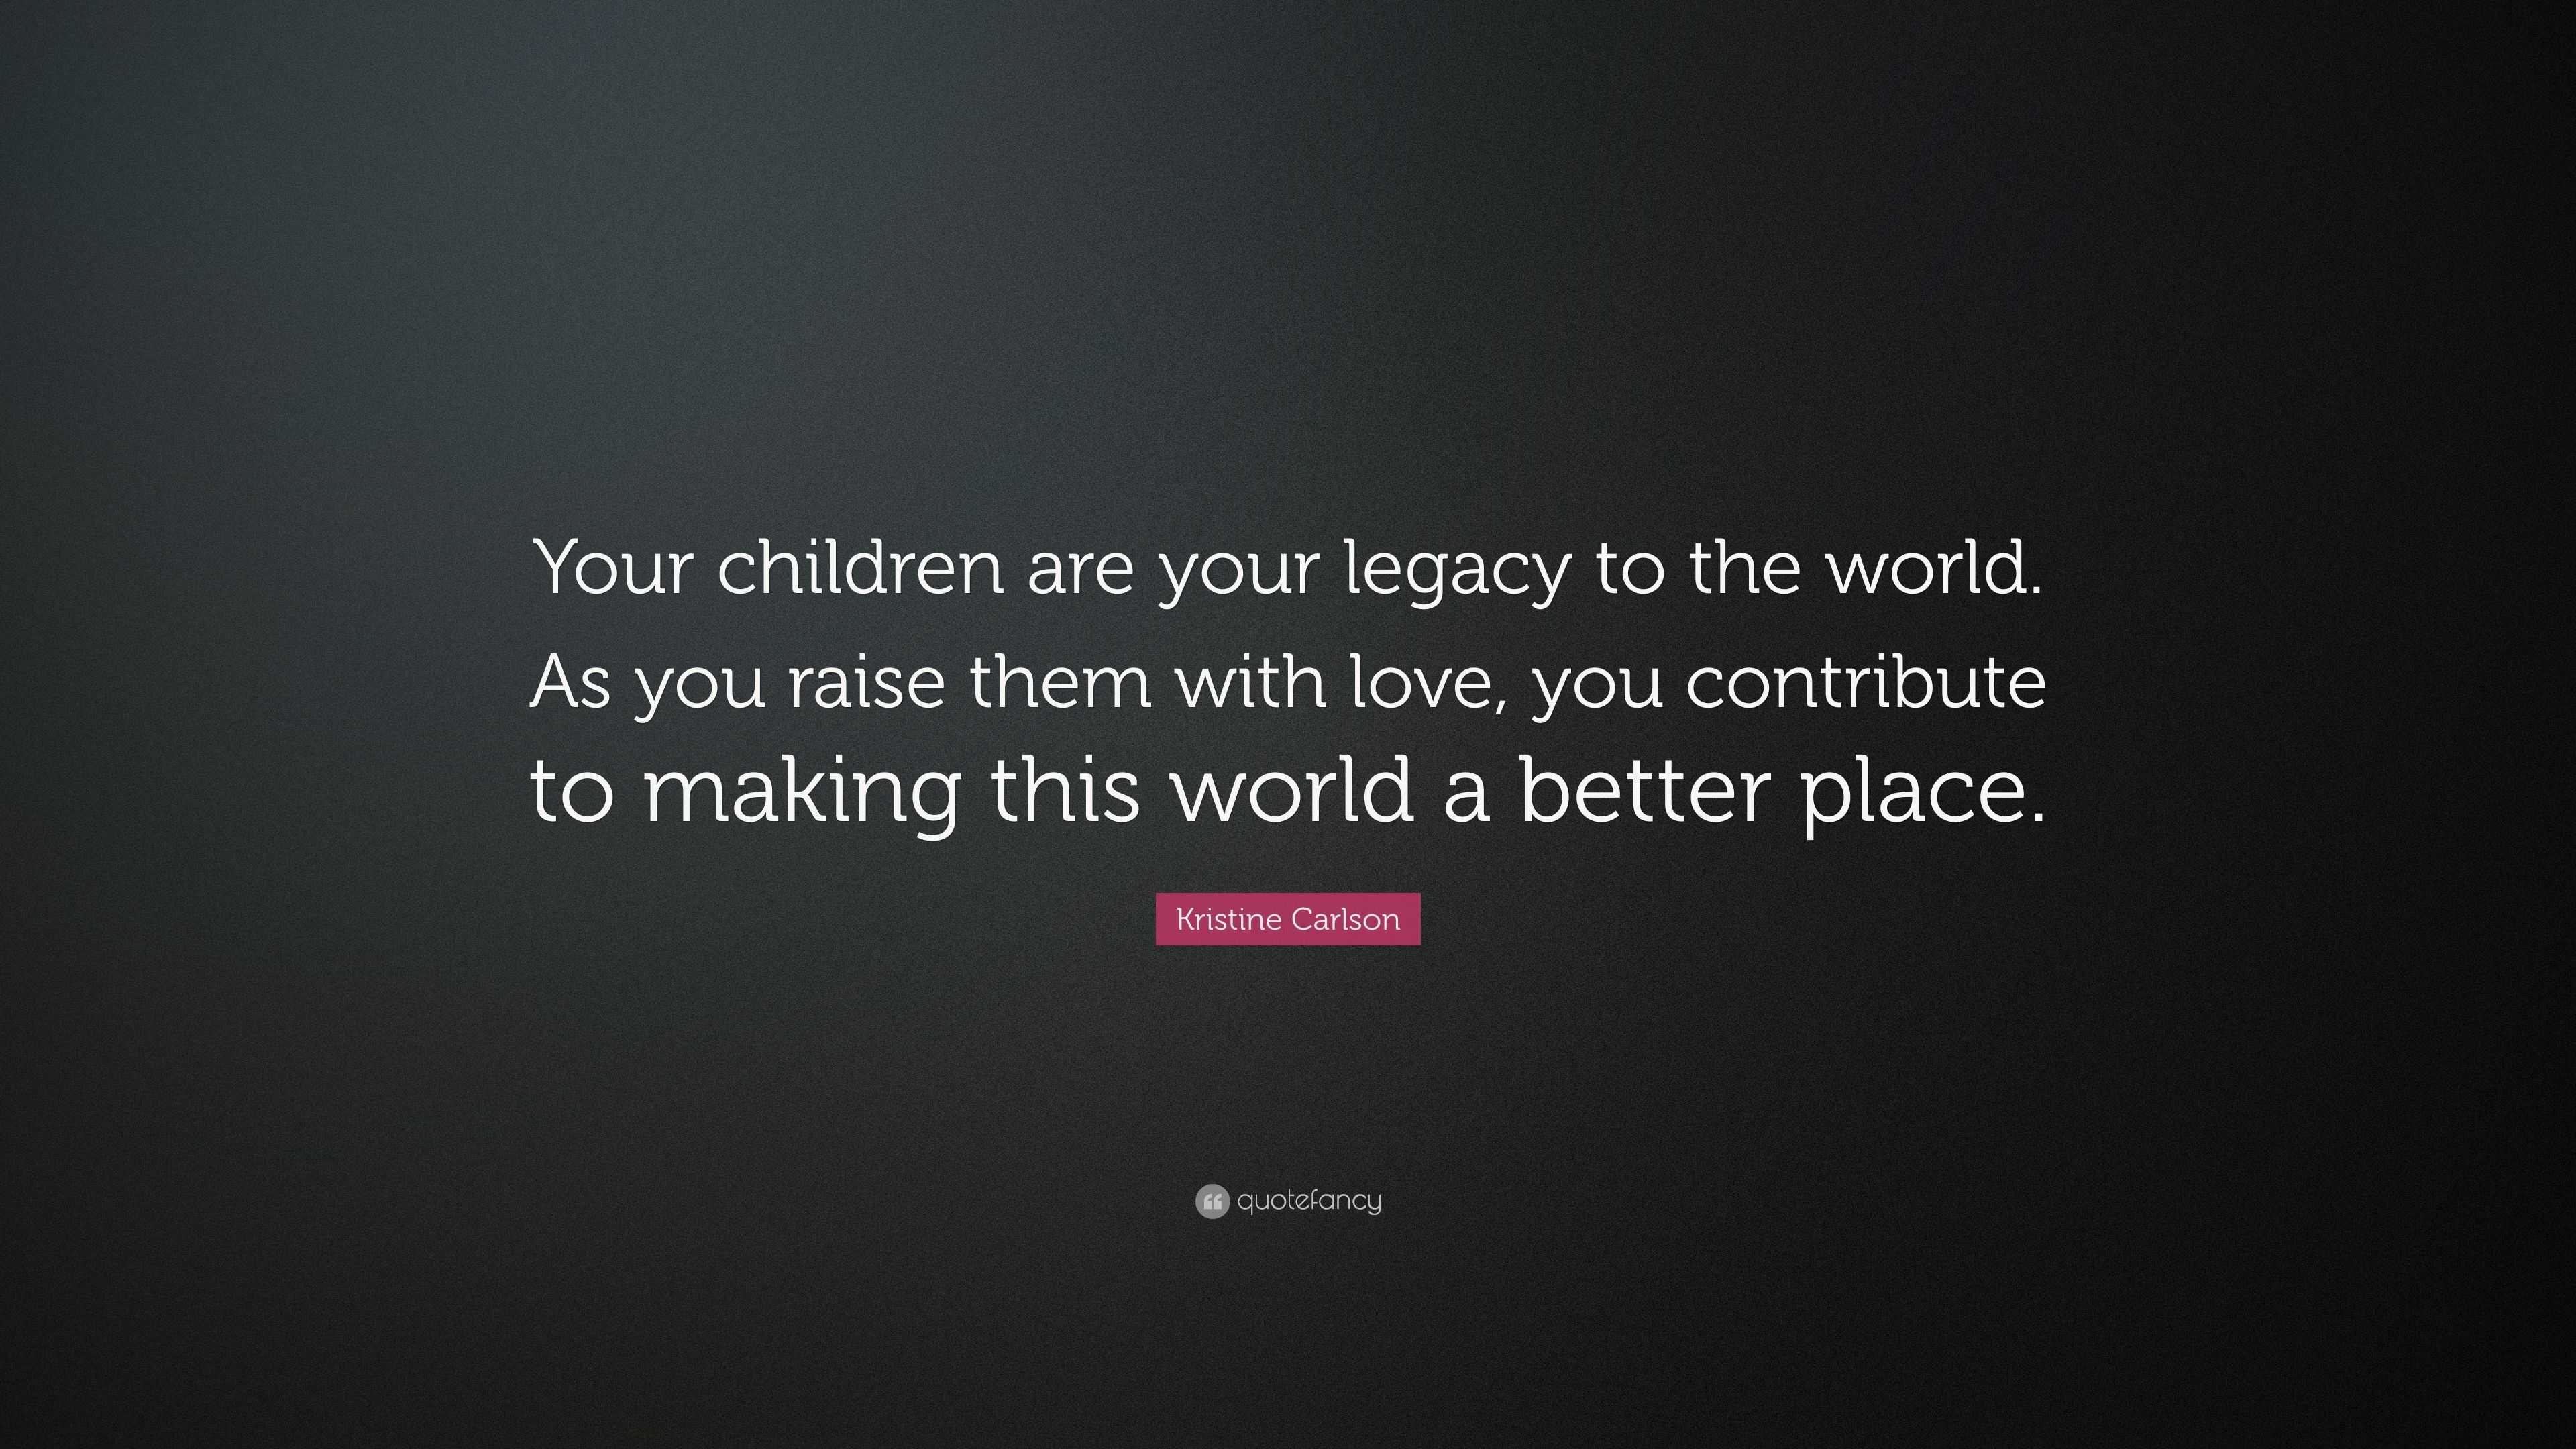 https://quotefancy.com/media/wallpaper/3840x2160/4644013-Kristine-Carlson-Quote-Your-children-are-your-legacy-to-the-world.jpg